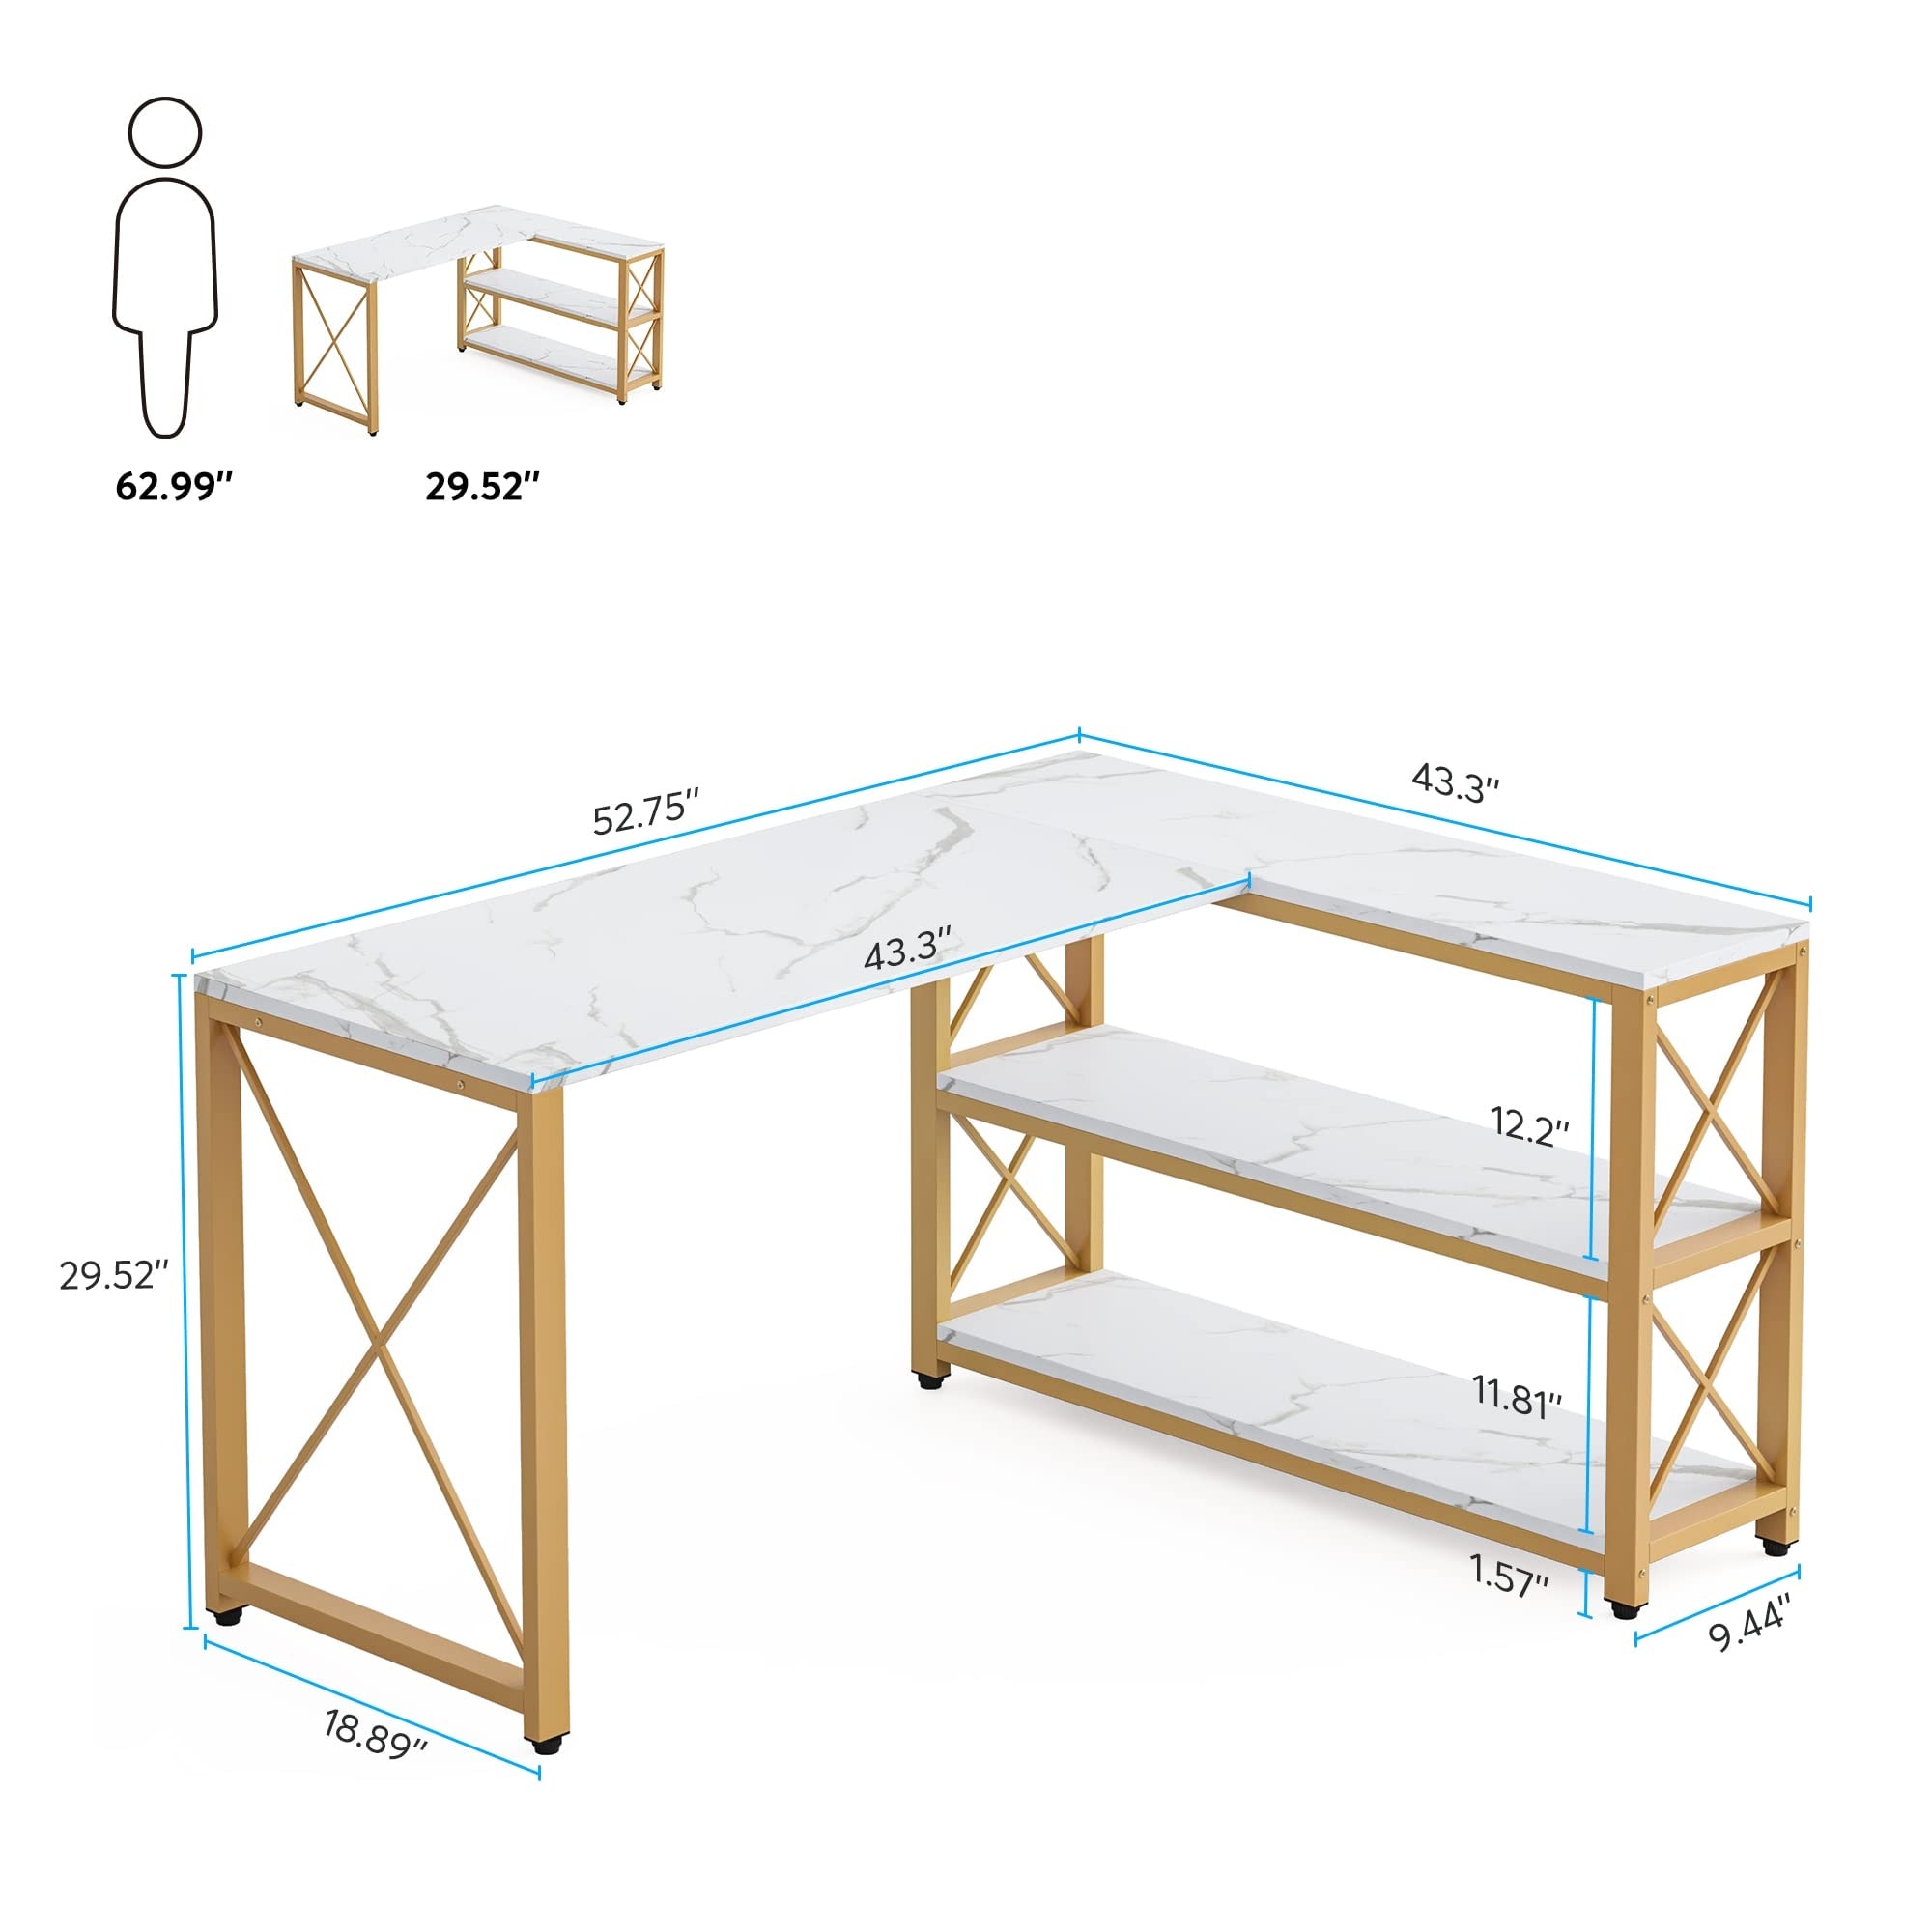 Reversible Industrial L-Shaped Computer Desk with Storage Shelves